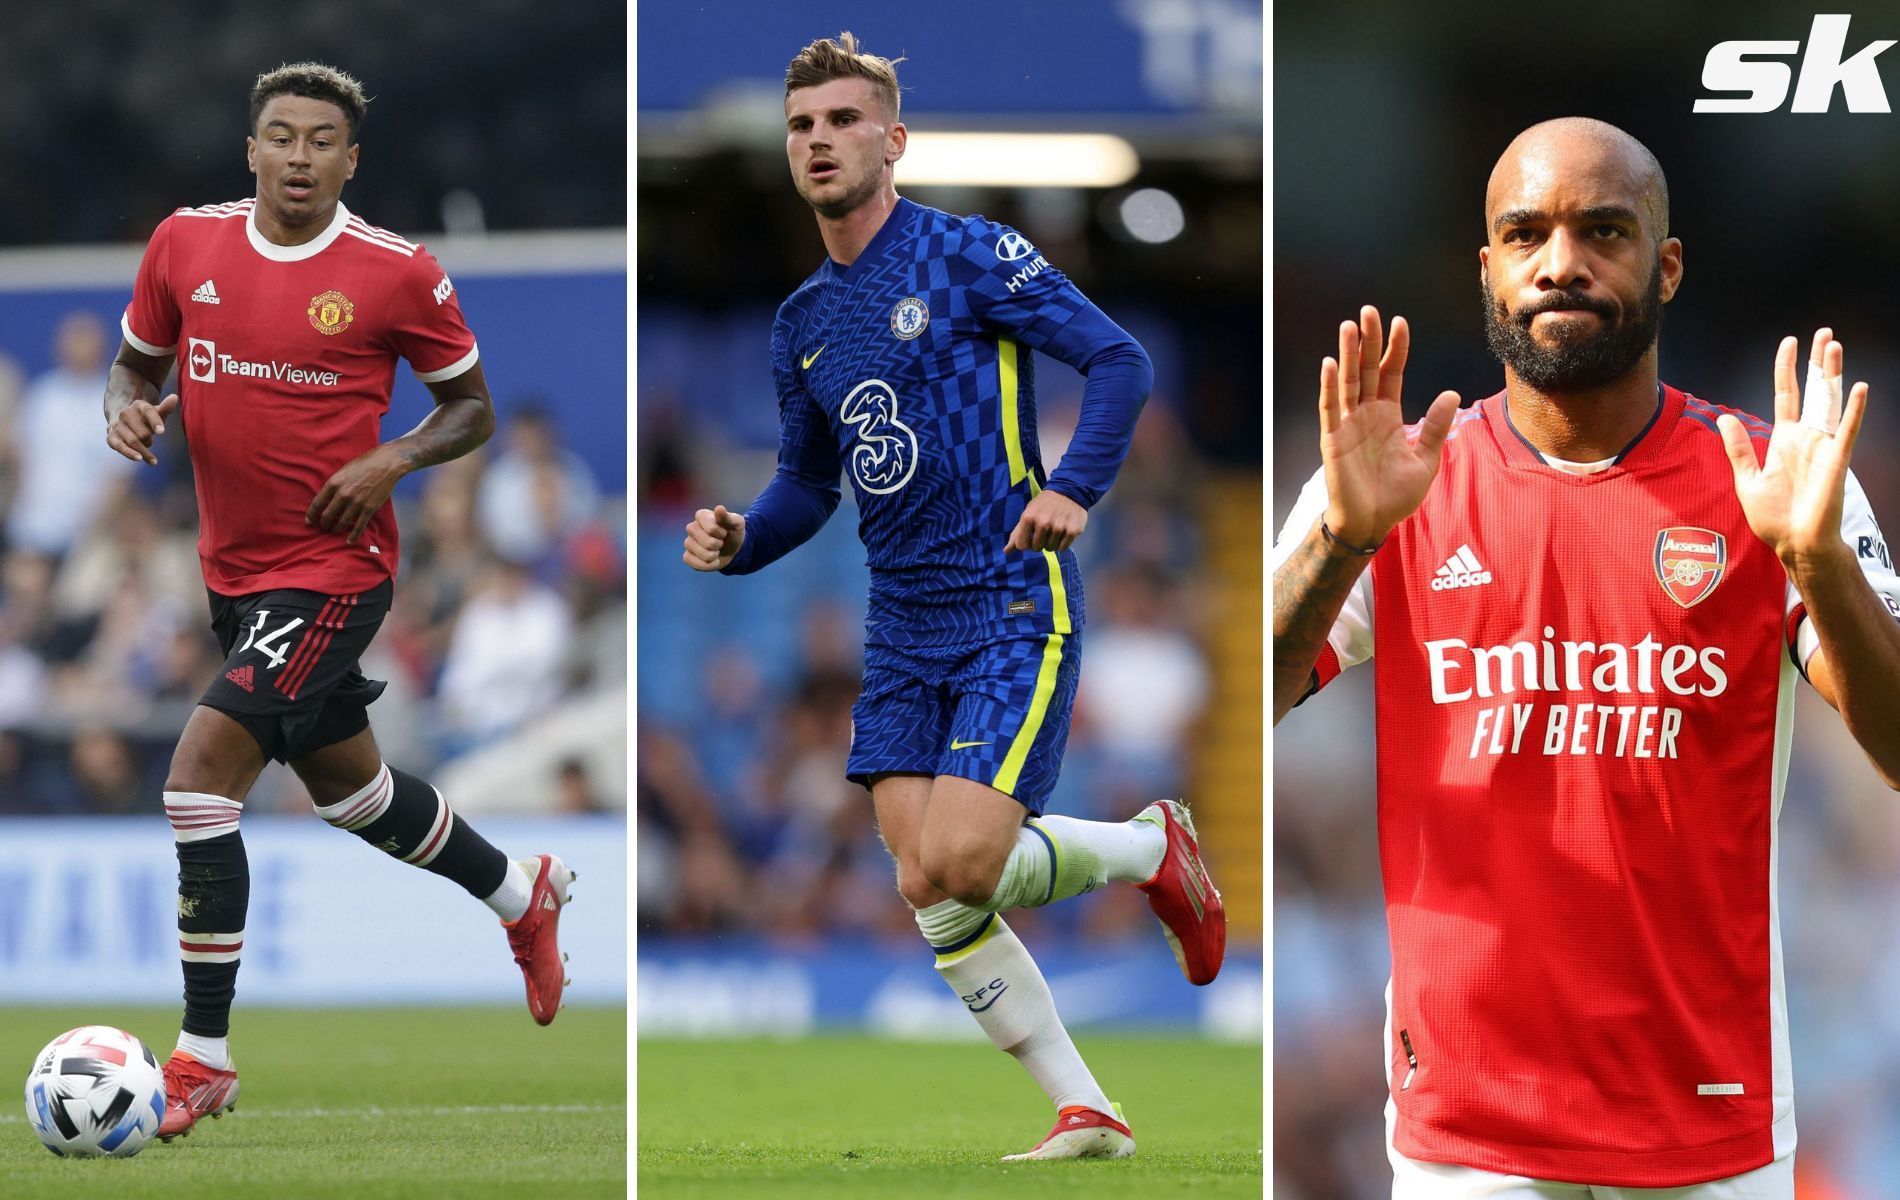 Some quality Premier League players could be leaving their clubs in January.